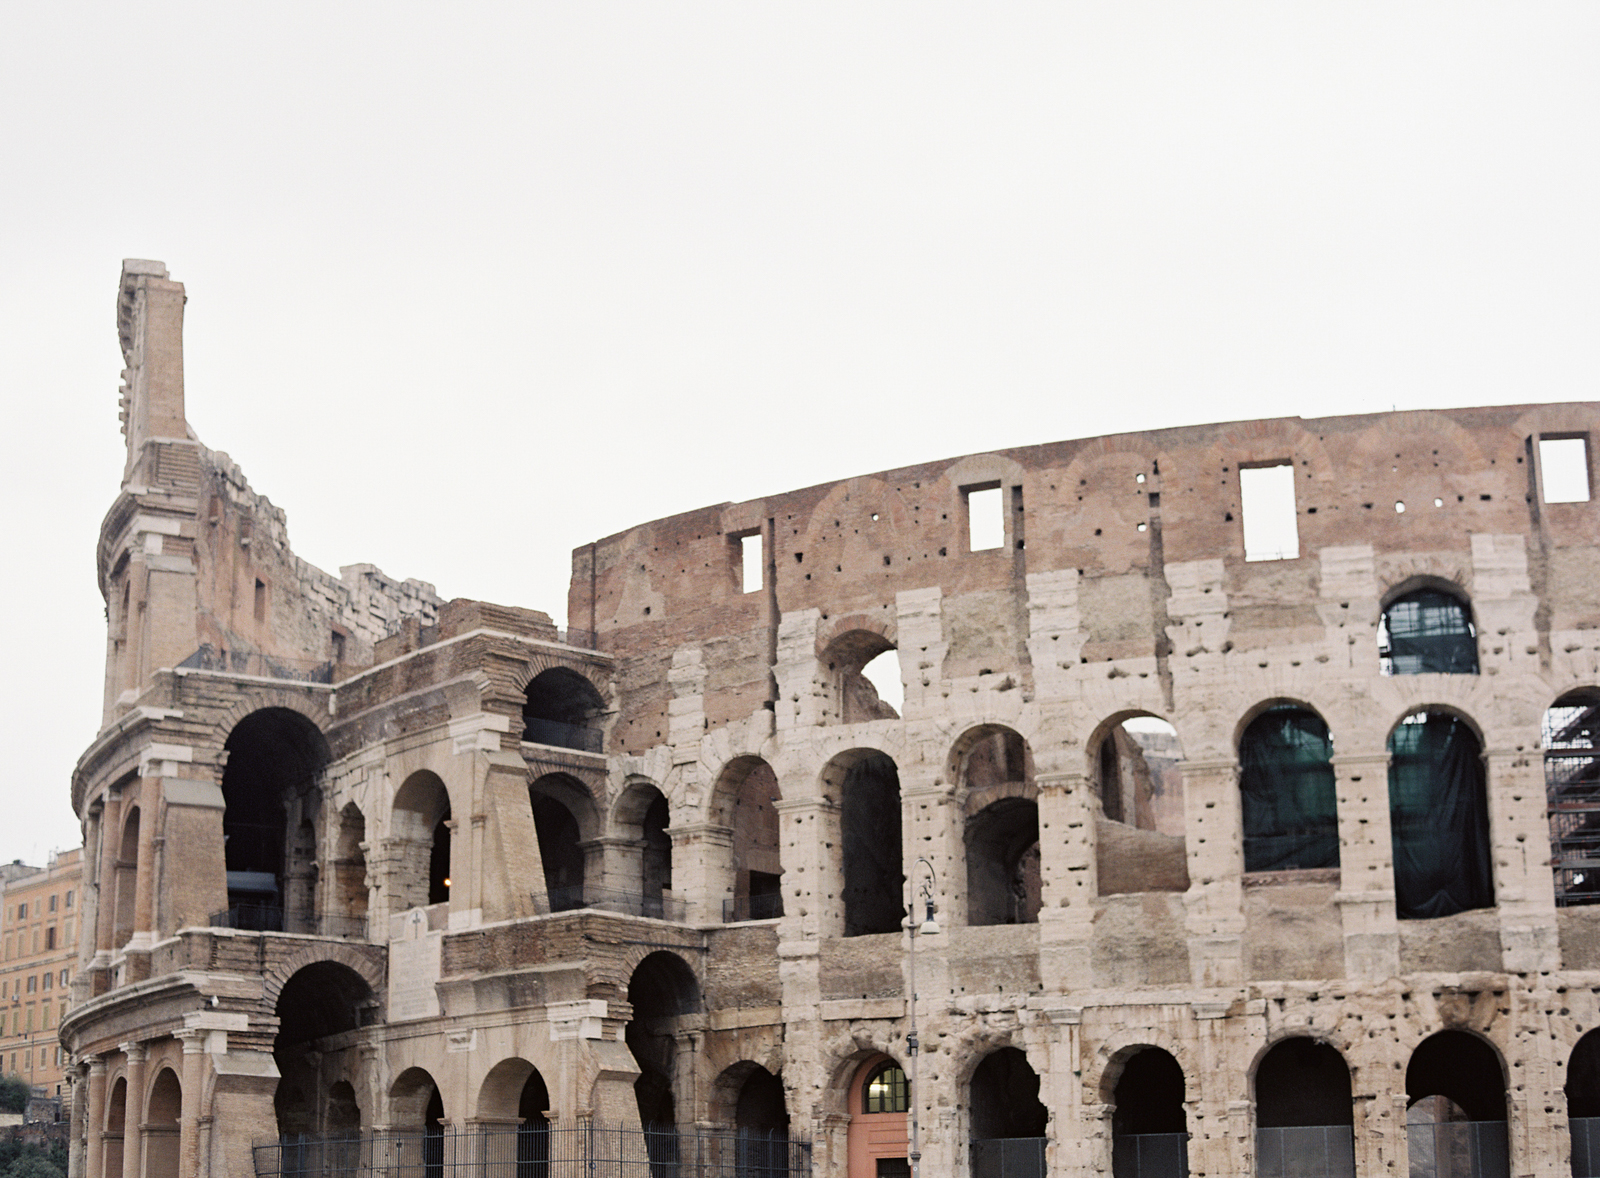 Elopements: How to find the ideal location -Rome